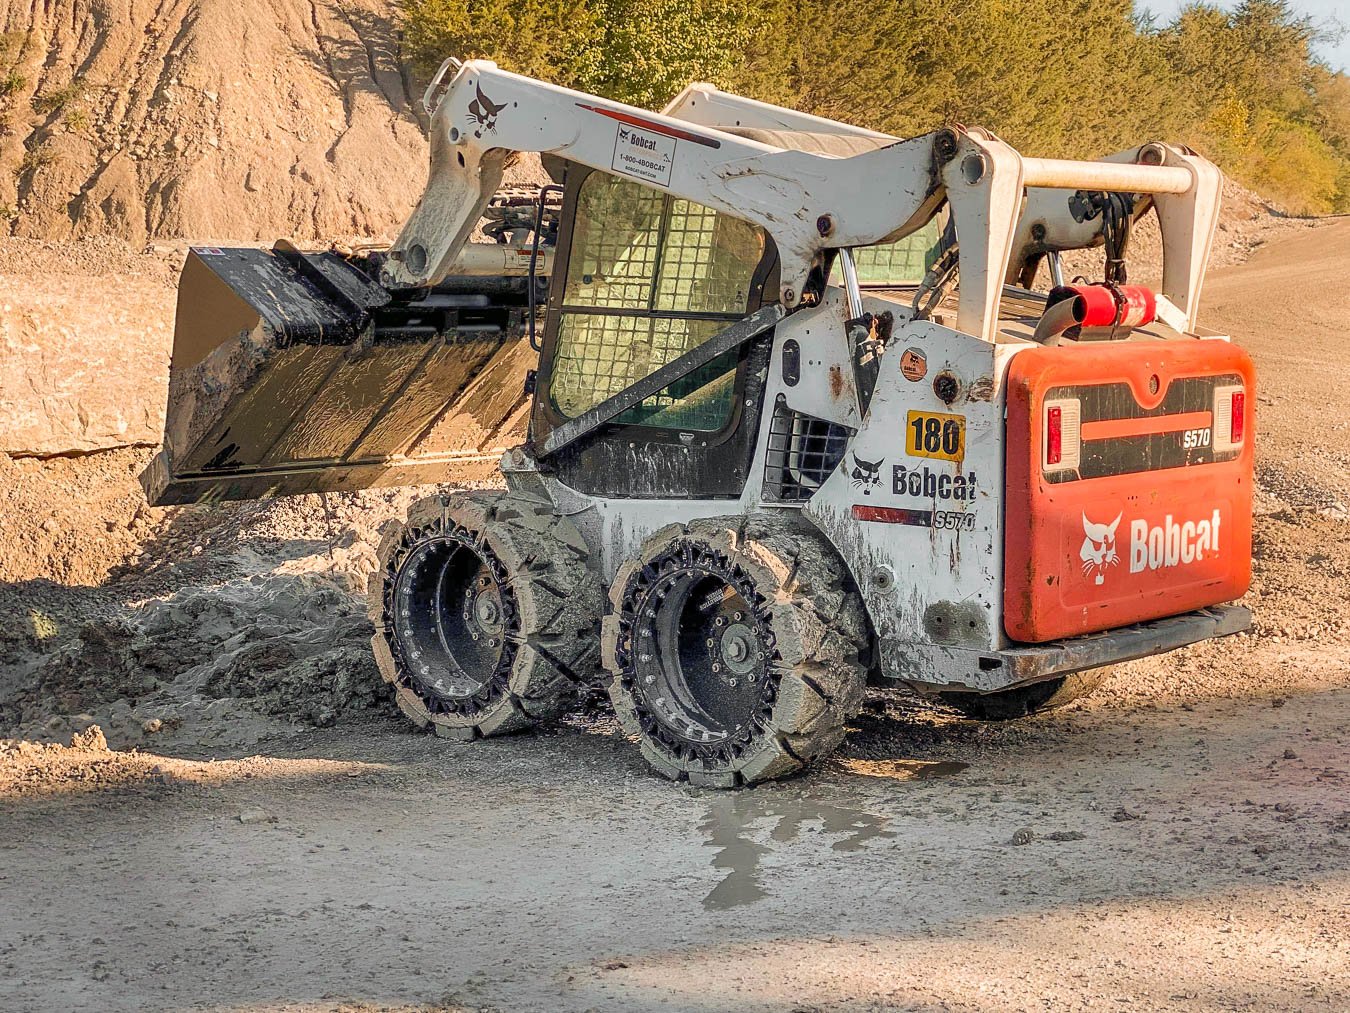 This image shows a BOBCAT S570 with our 10x16 5 Bobcat tires